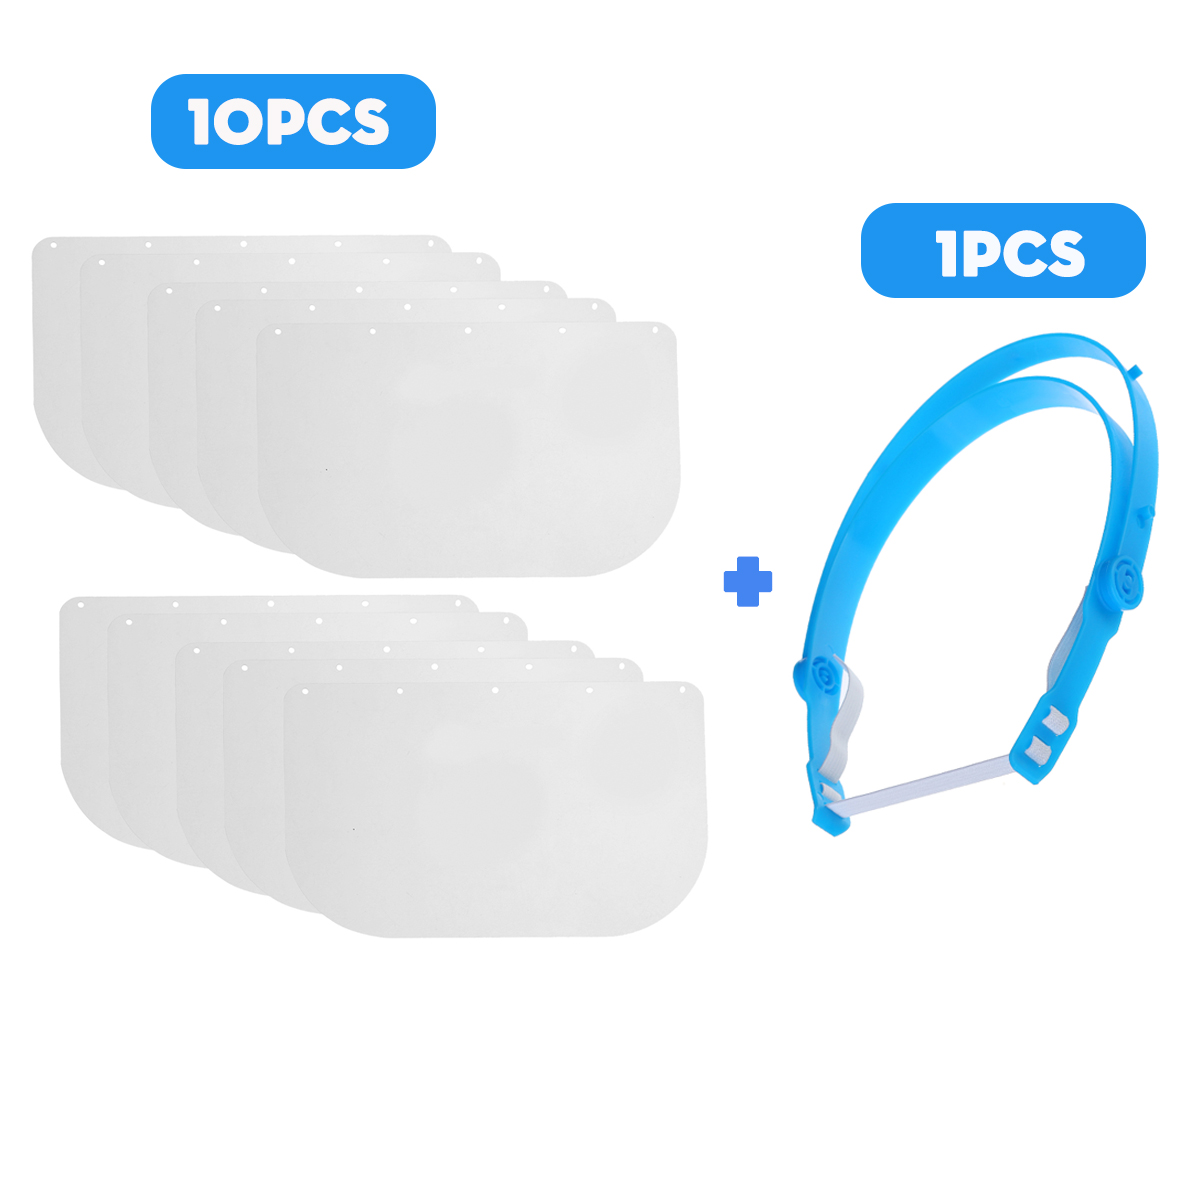 10Pcs Shield+1pcs Support Transparent Protective Full Face Visor Protection Safety Adjustable Work Guards